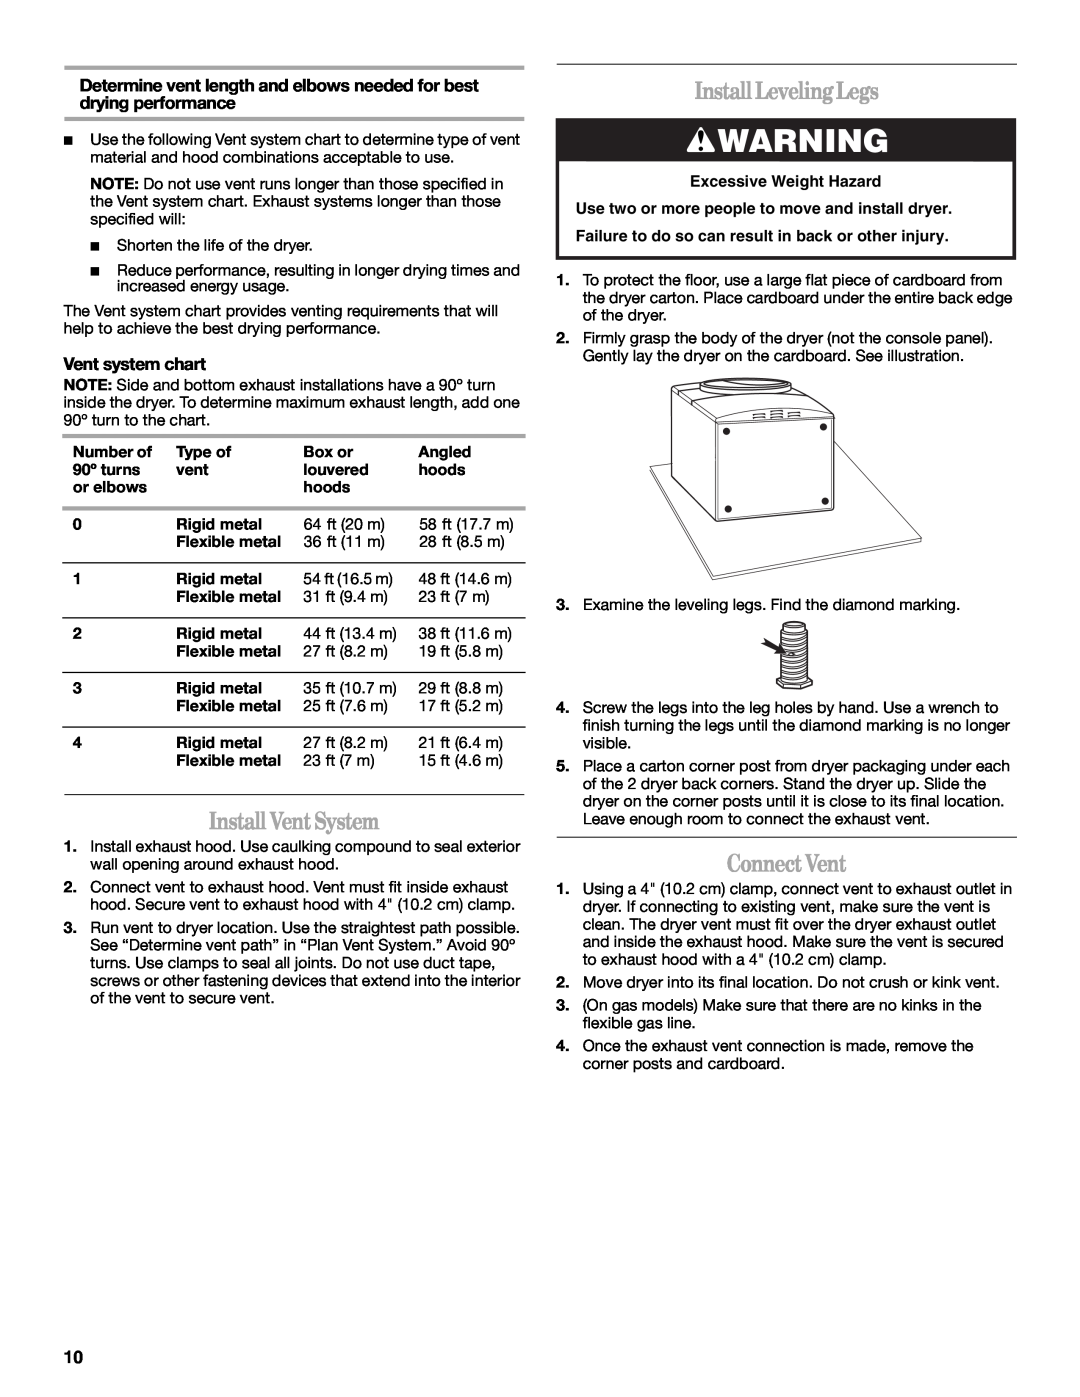 Whirlpool 8578901 manual Install VentSystem, Install LevelingLegs, ConnectVent, Vent system chart, Excessive Weight Hazard 